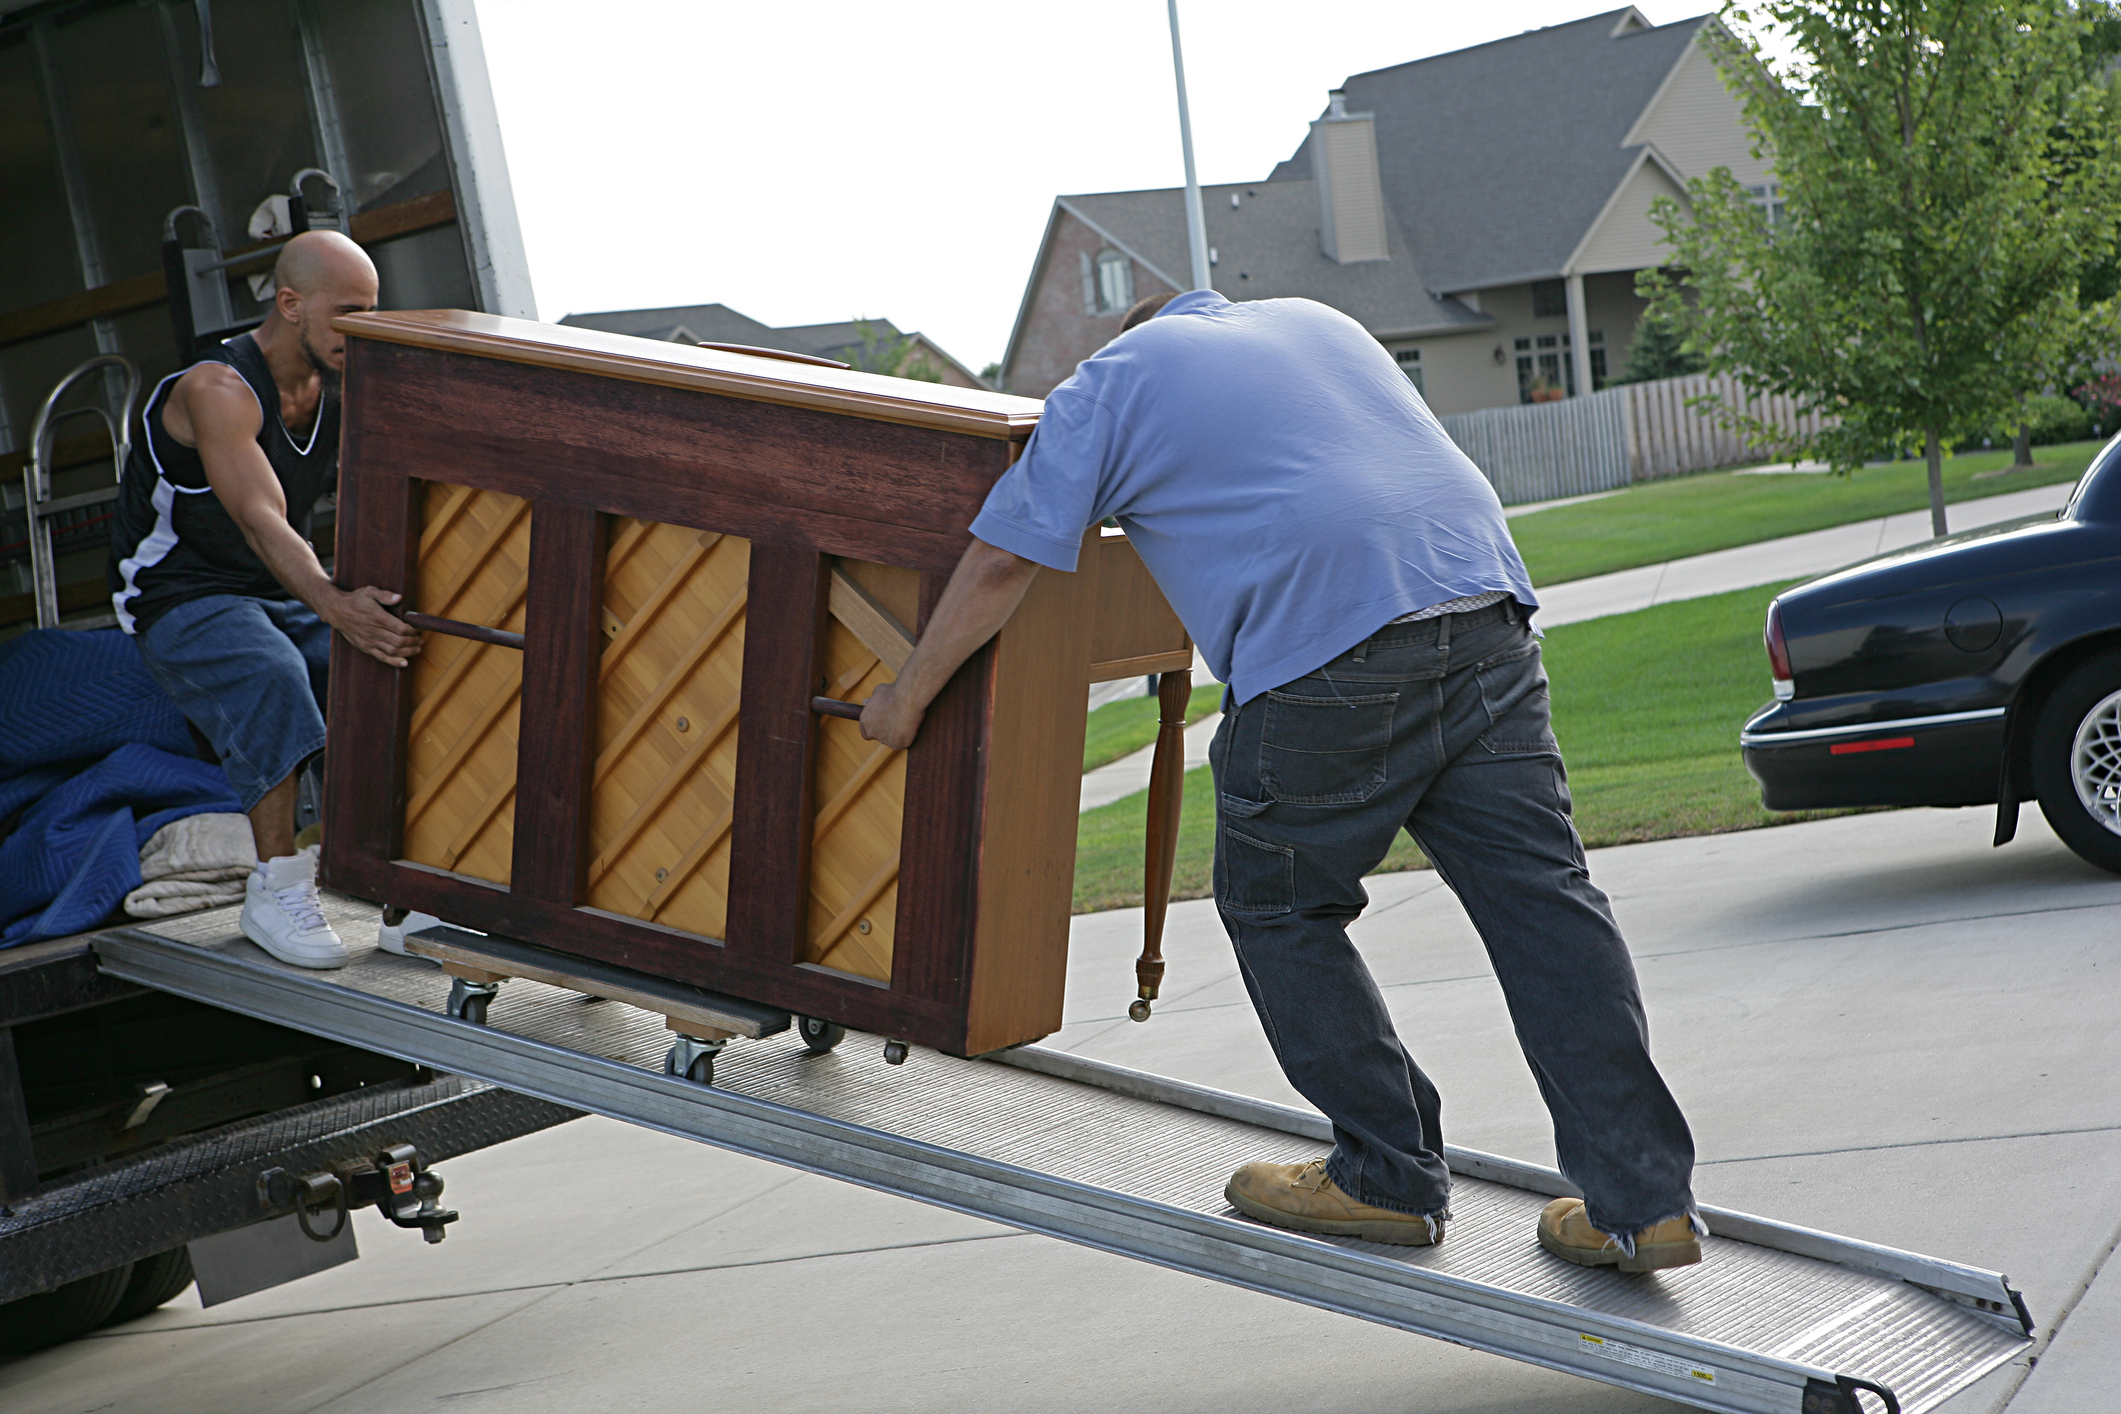 piano-movers